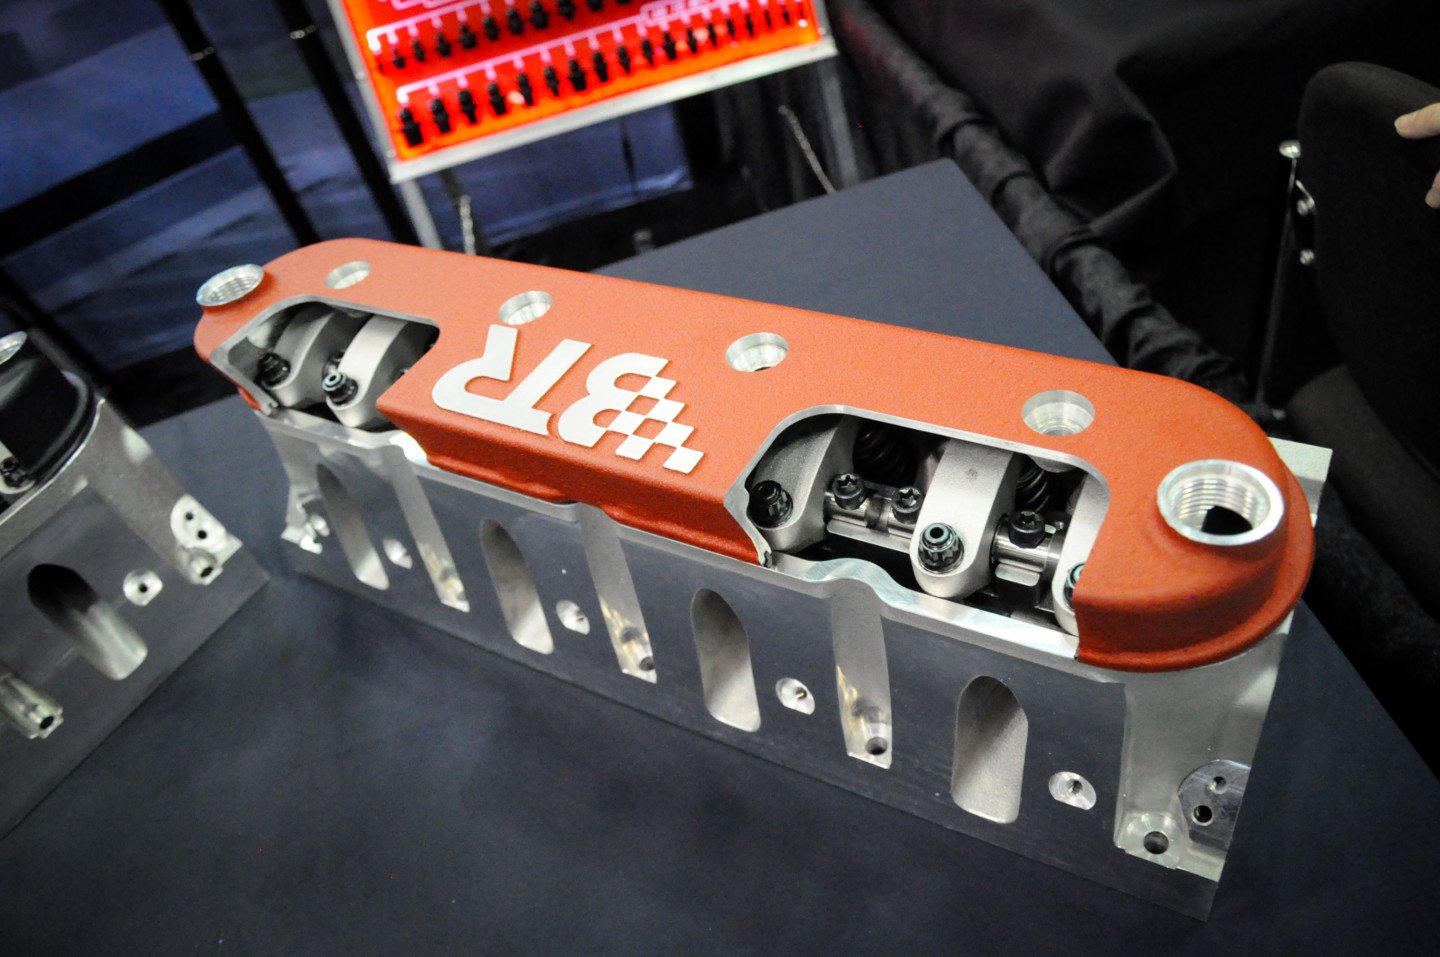 The additional clearance provided by BTR Valve Covers from Brian Tooley Racing emphasized via a clear visual cut-out.